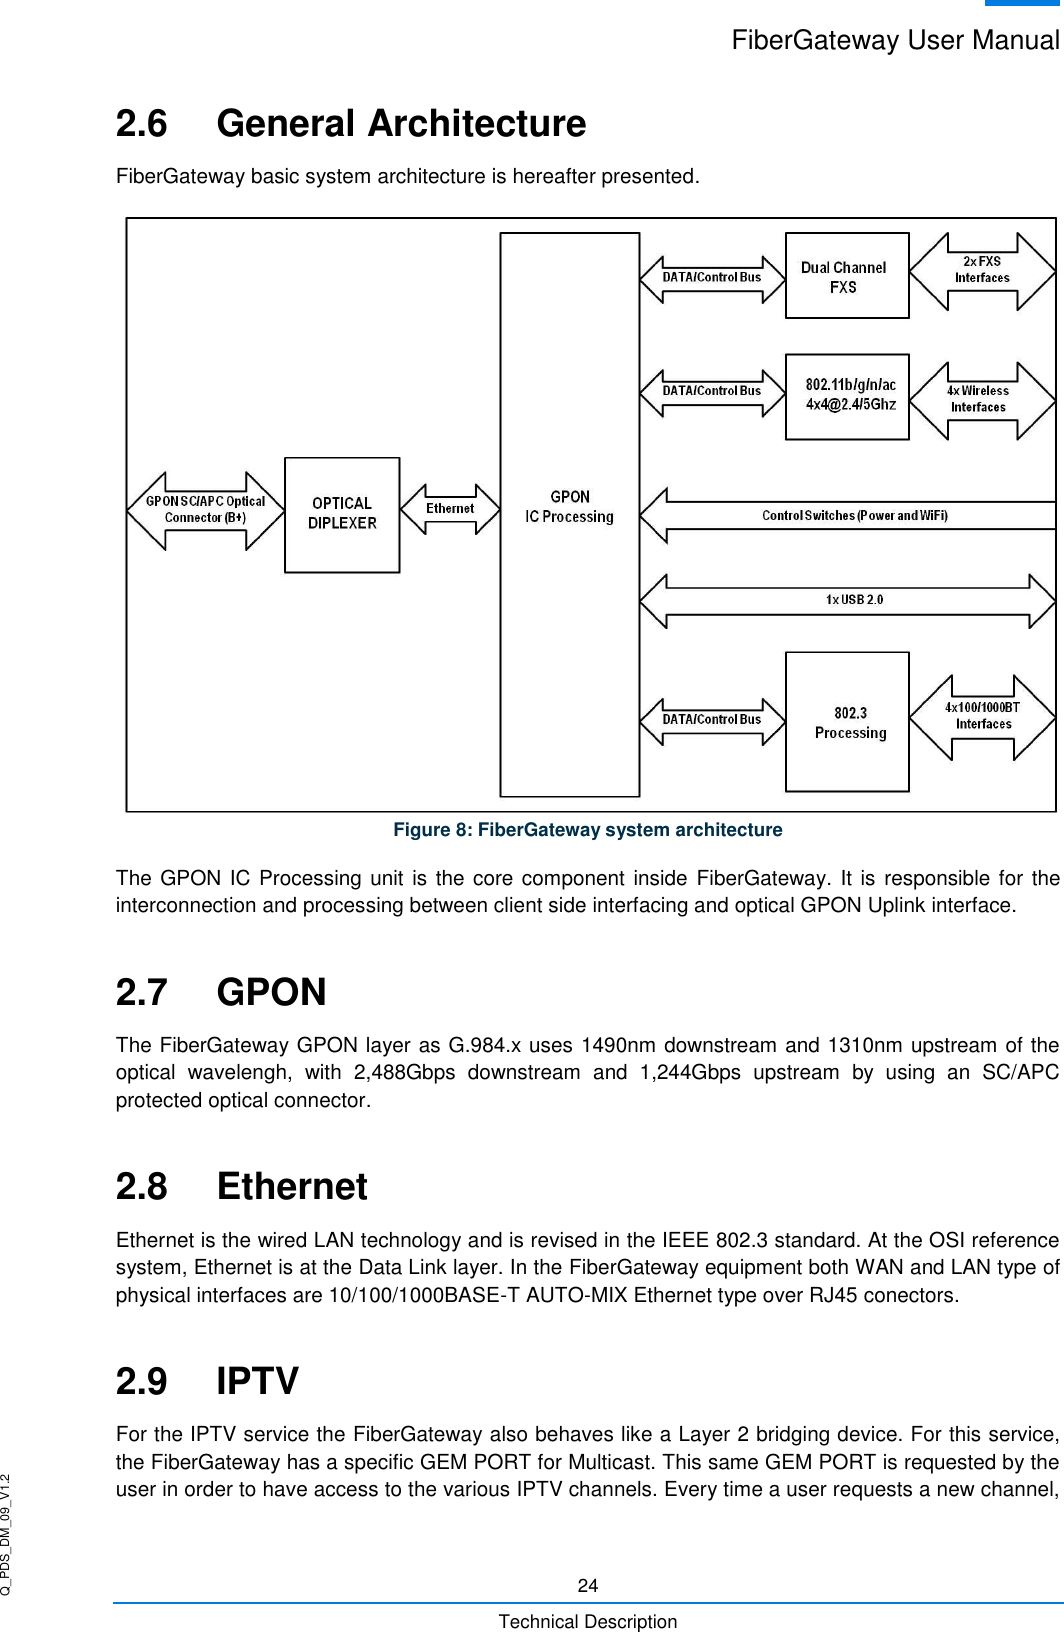 Q_PDS_DM_09_V1.2 FiberGateway User Manual  24 Technical Description 2.6  General Architecture FiberGateway basic system architecture is hereafter presented.  Figure 8: FiberGateway system architecture The GPON IC Processing unit is the core component inside  FiberGateway. It is responsible for  the interconnection and processing between client side interfacing and optical GPON Uplink interface. 2.7  GPON The FiberGateway GPON layer as G.984.x uses 1490nm downstream and 1310nm upstream of the optical  wavelengh,  with  2,488Gbps  downstream  and  1,244Gbps  upstream  by  using  an  SC/APC protected optical connector. 2.8  Ethernet Ethernet is the wired LAN technology and is revised in the IEEE 802.3 standard. At the OSI reference system, Ethernet is at the Data Link layer. In the FiberGateway equipment both WAN and LAN type of physical interfaces are 10/100/1000BASE-T AUTO-MIX Ethernet type over RJ45 conectors. 2.9  IPTV For the IPTV service the FiberGateway also behaves like a Layer 2 bridging device. For this service, the FiberGateway has a specific GEM PORT for Multicast. This same GEM PORT is requested by the user in order to have access to the various IPTV channels. Every time a user requests a new channel, 